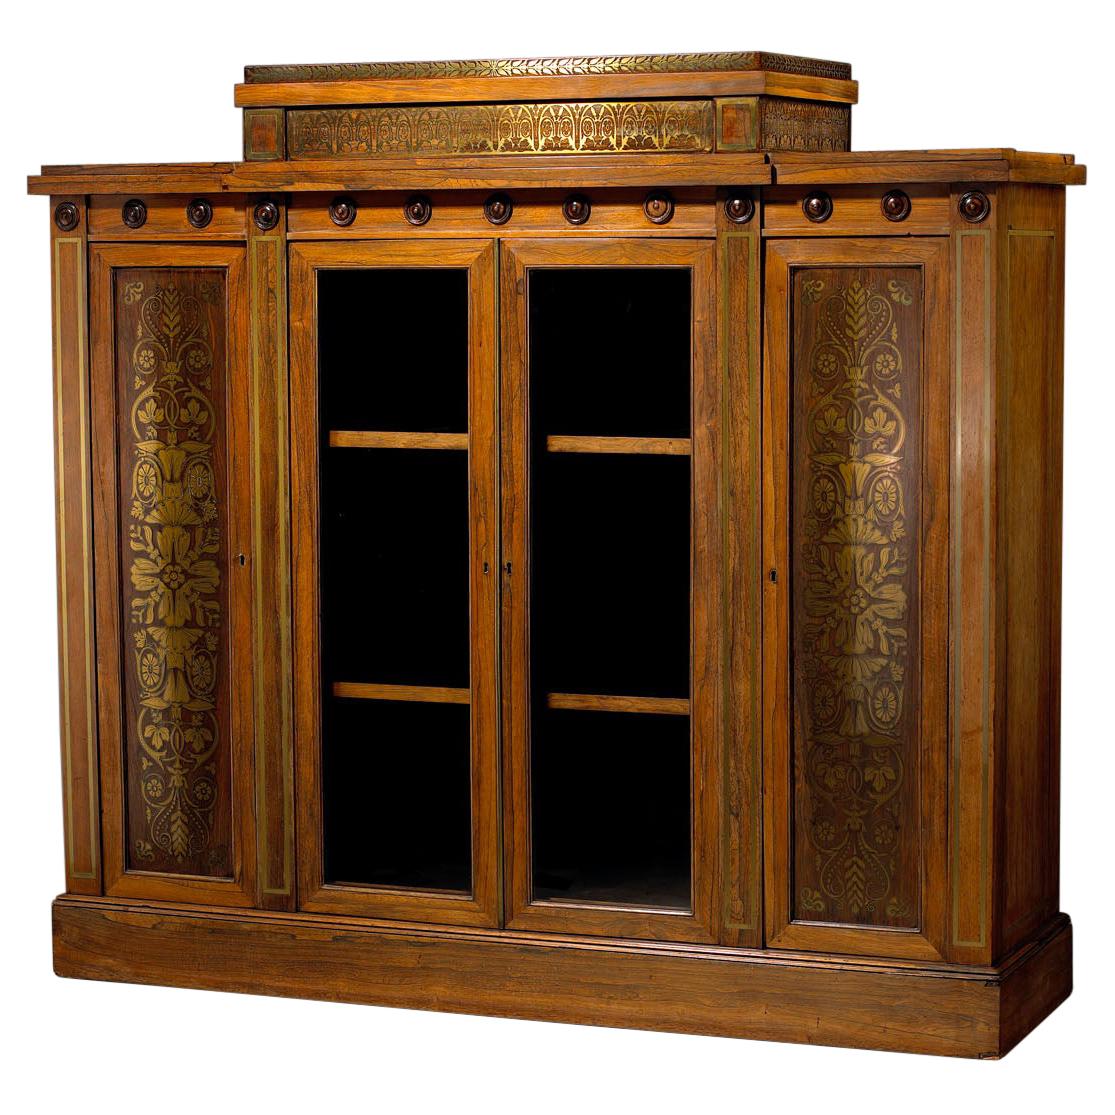 George Bullock Breakfront Rosewood and Brass Inlaid Side Cabinet